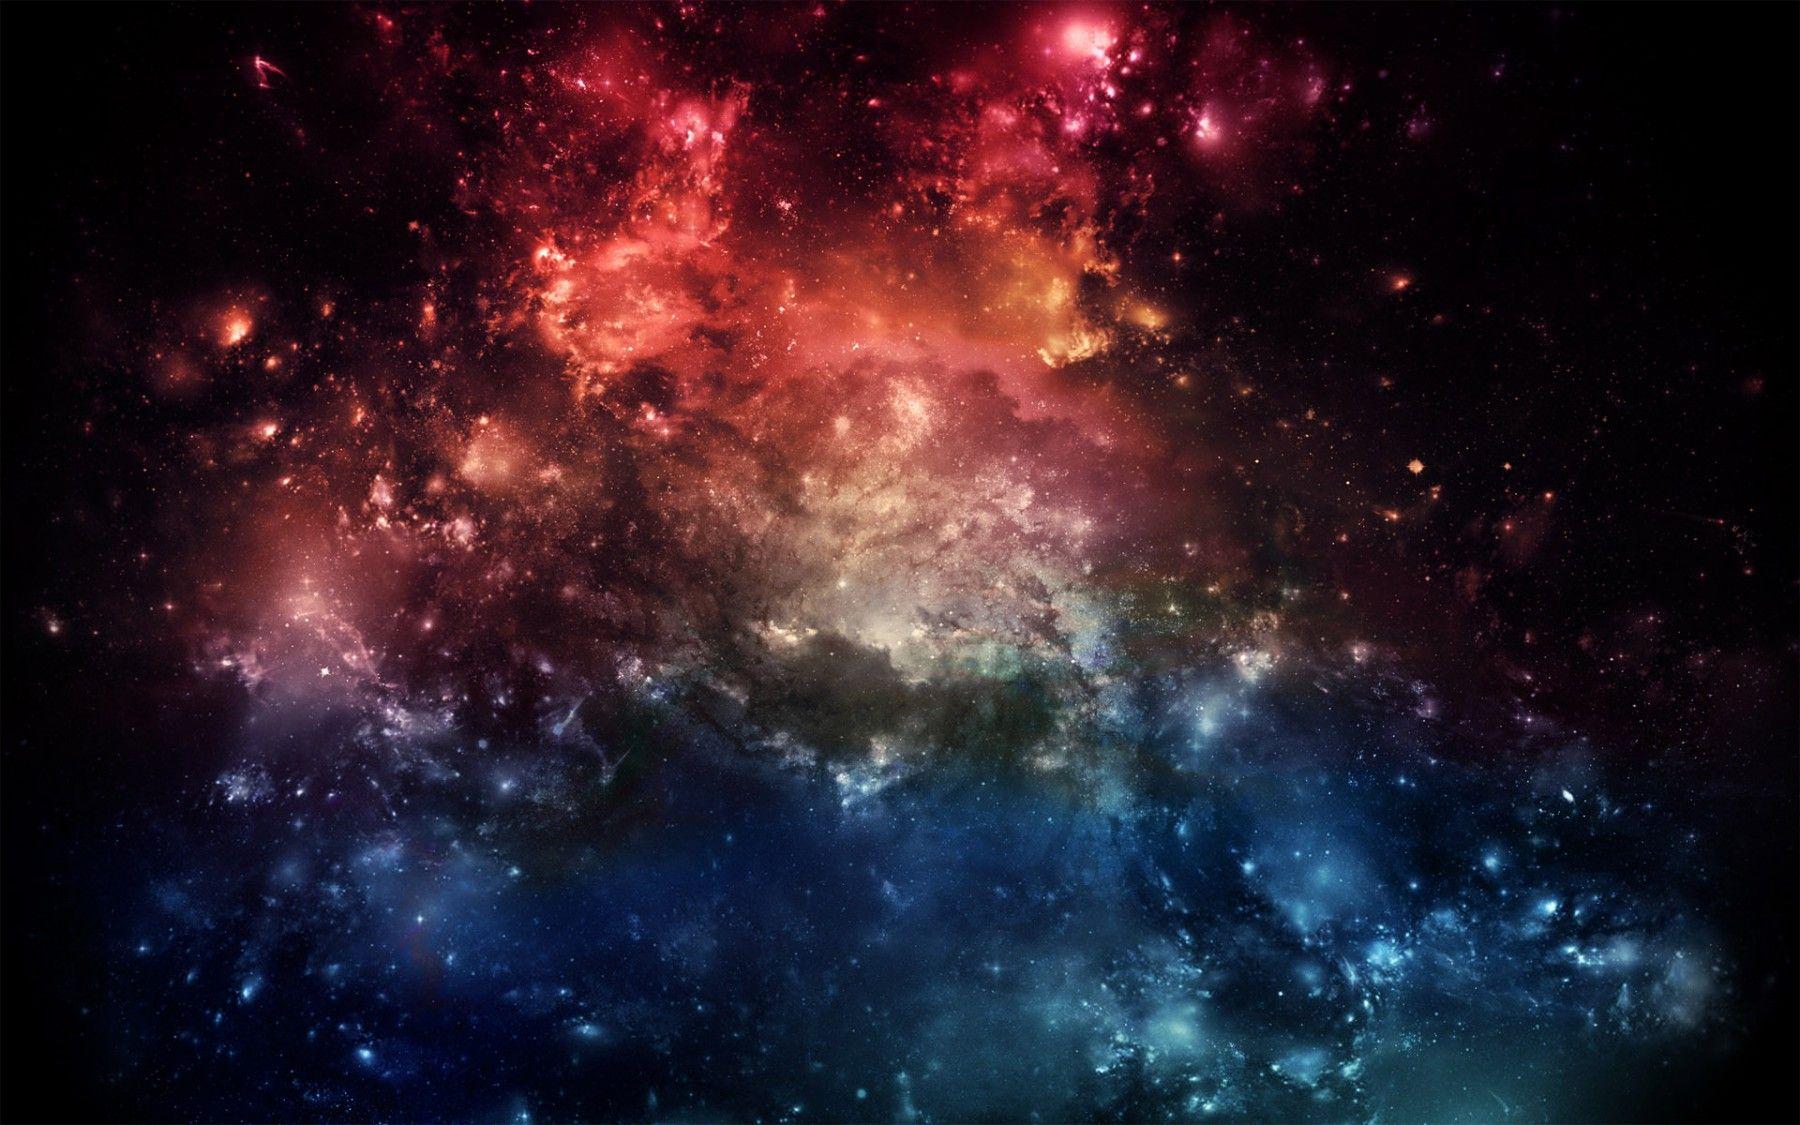 Red and Blue Space Wallpapers - Top Free Red and Blue Space Backgrounds